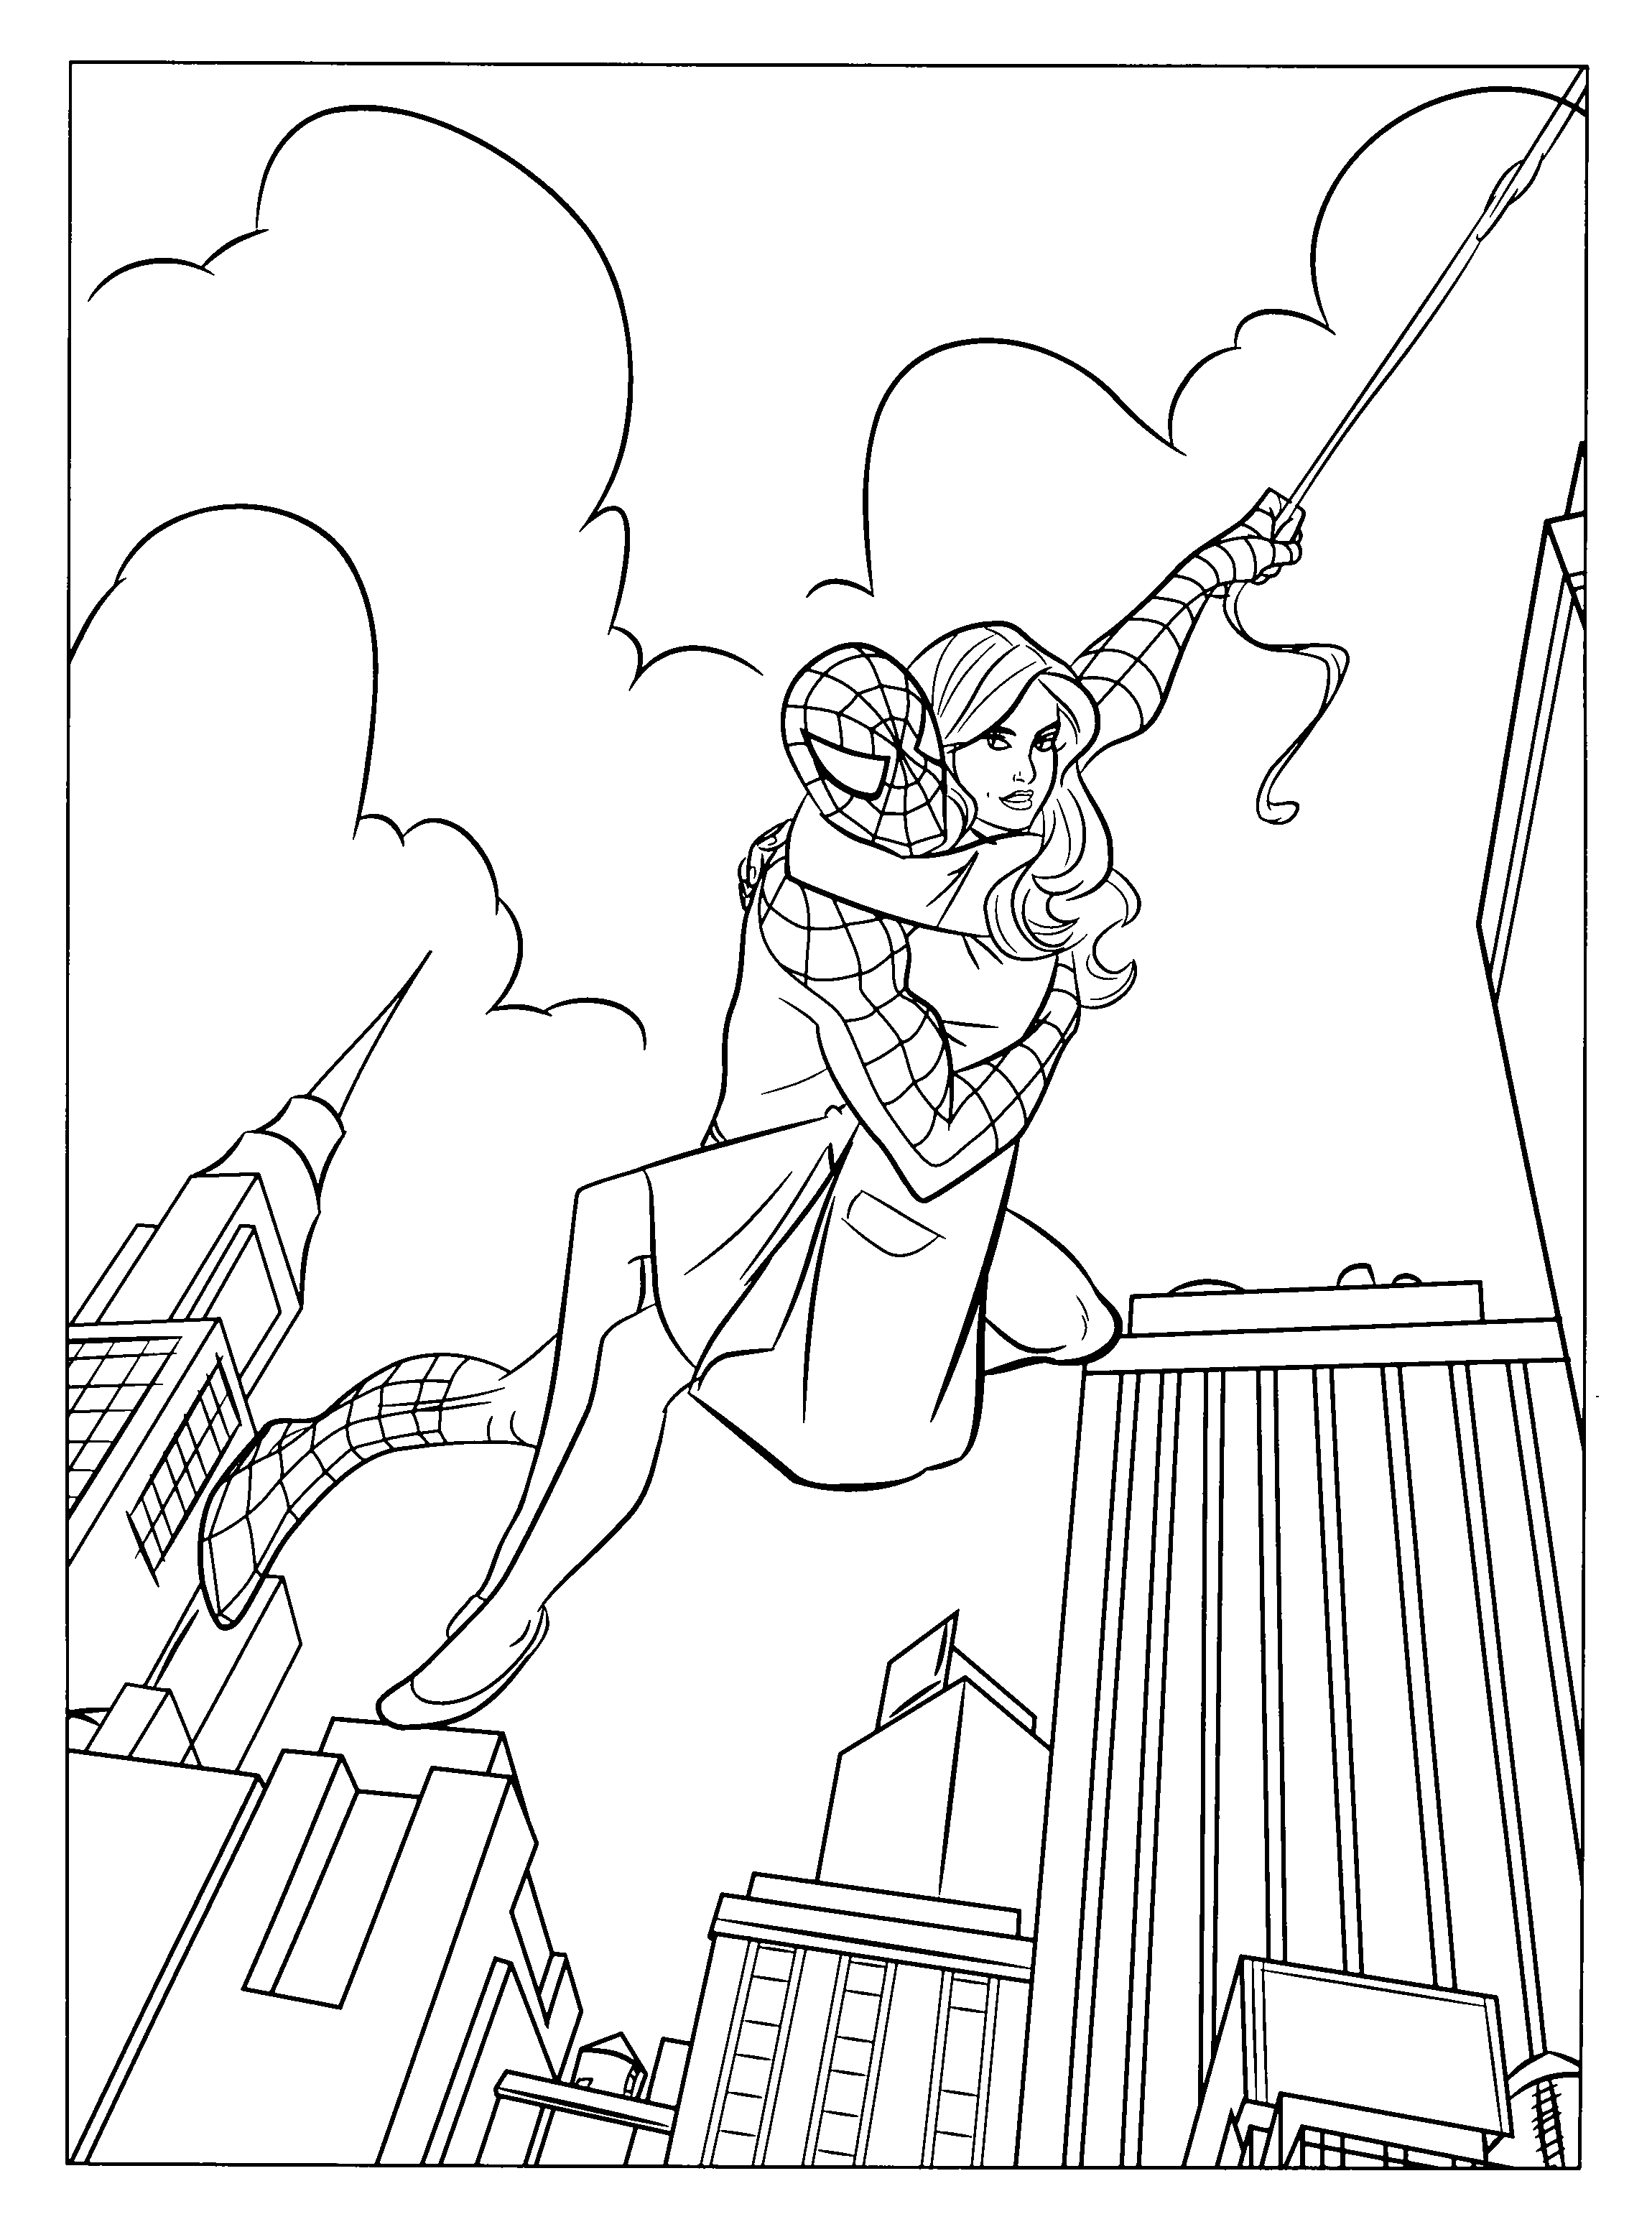 Spiderman 3 coloring pages